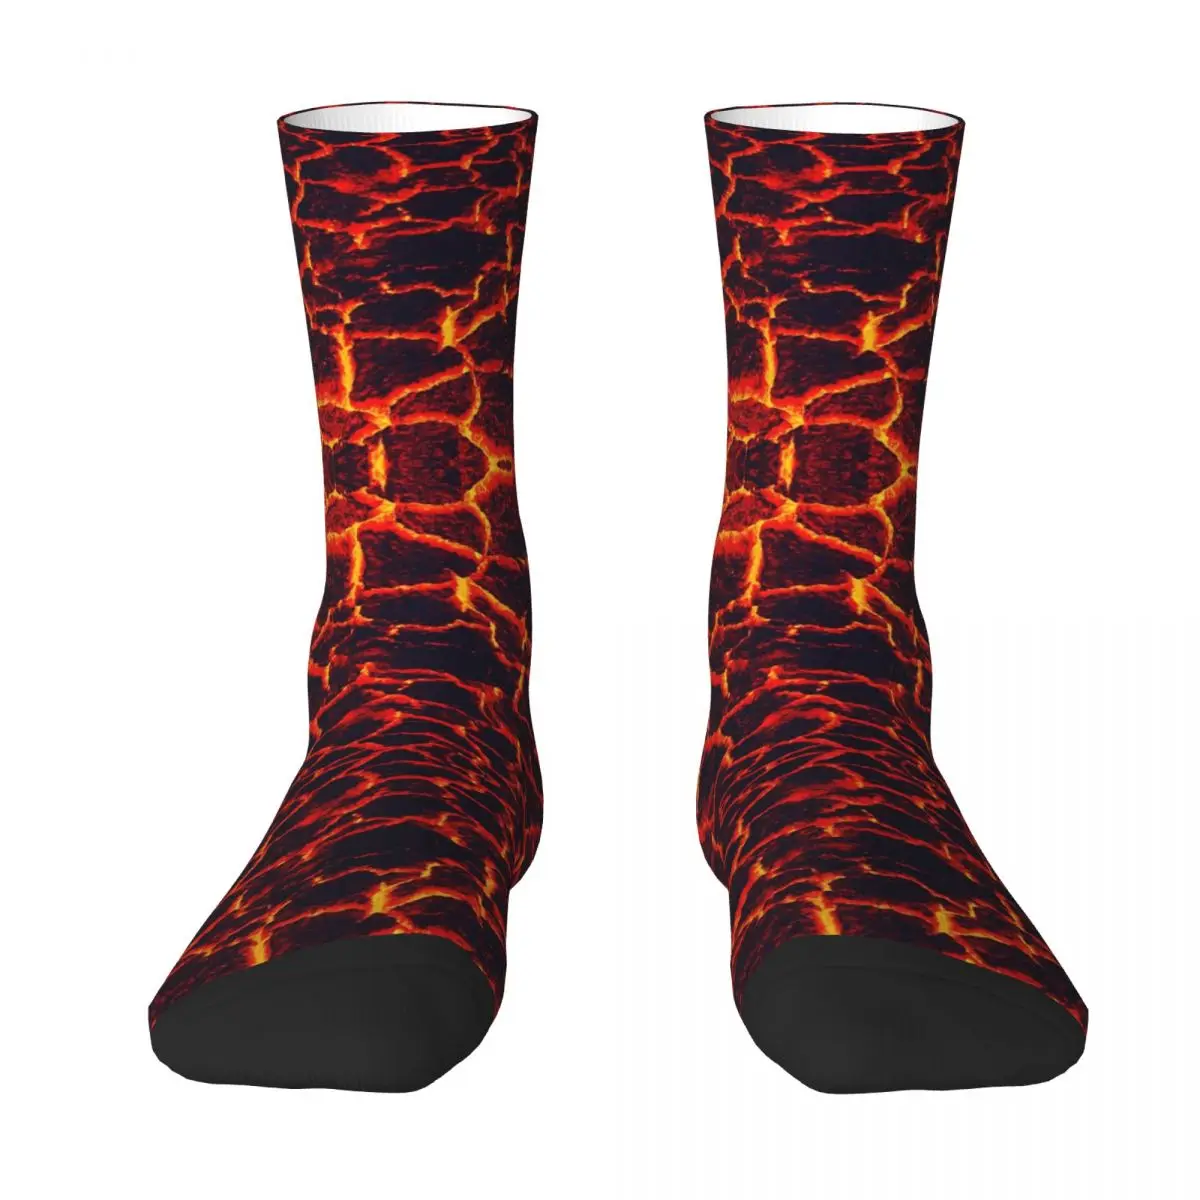 

Funny Graphic Active Lava R92 Stocking BEST TO BUY Knapsack Compression SocksNerd